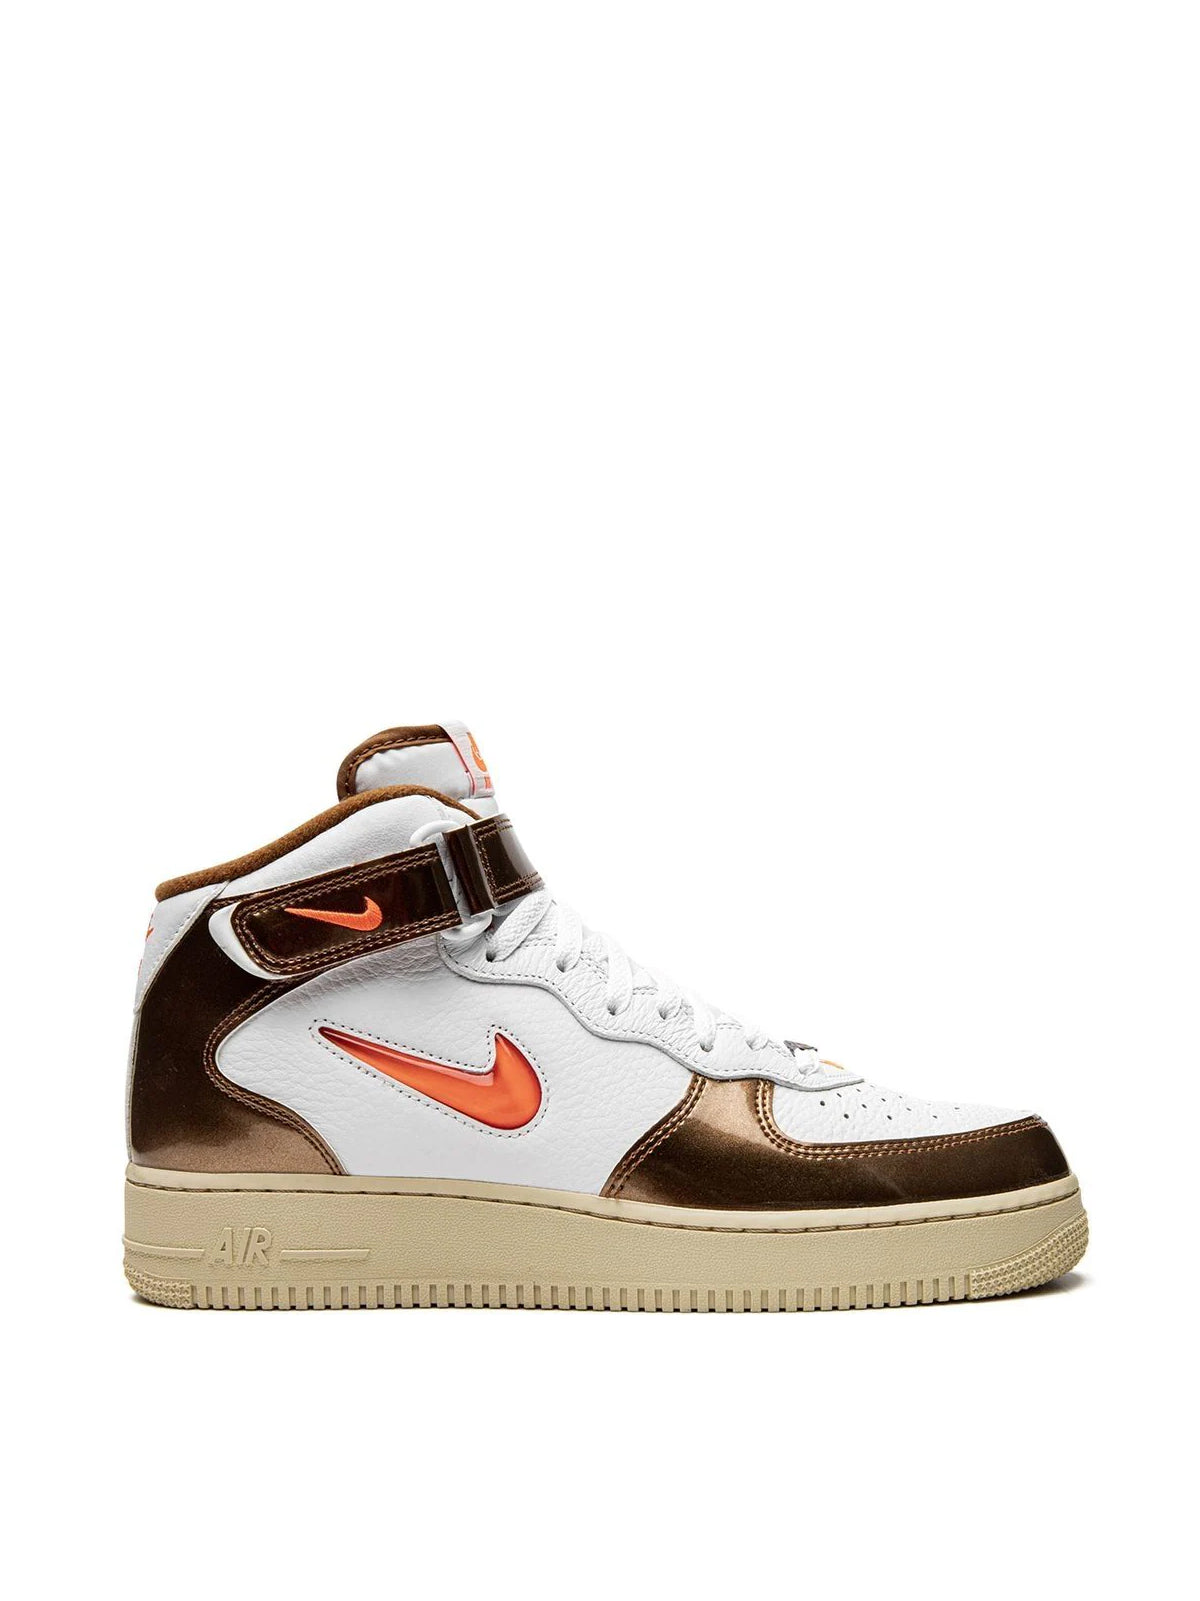 Nike-OUTLET-SALE-Air Force 1 Mid QS Jewel Sneakers-ARCHIVIST